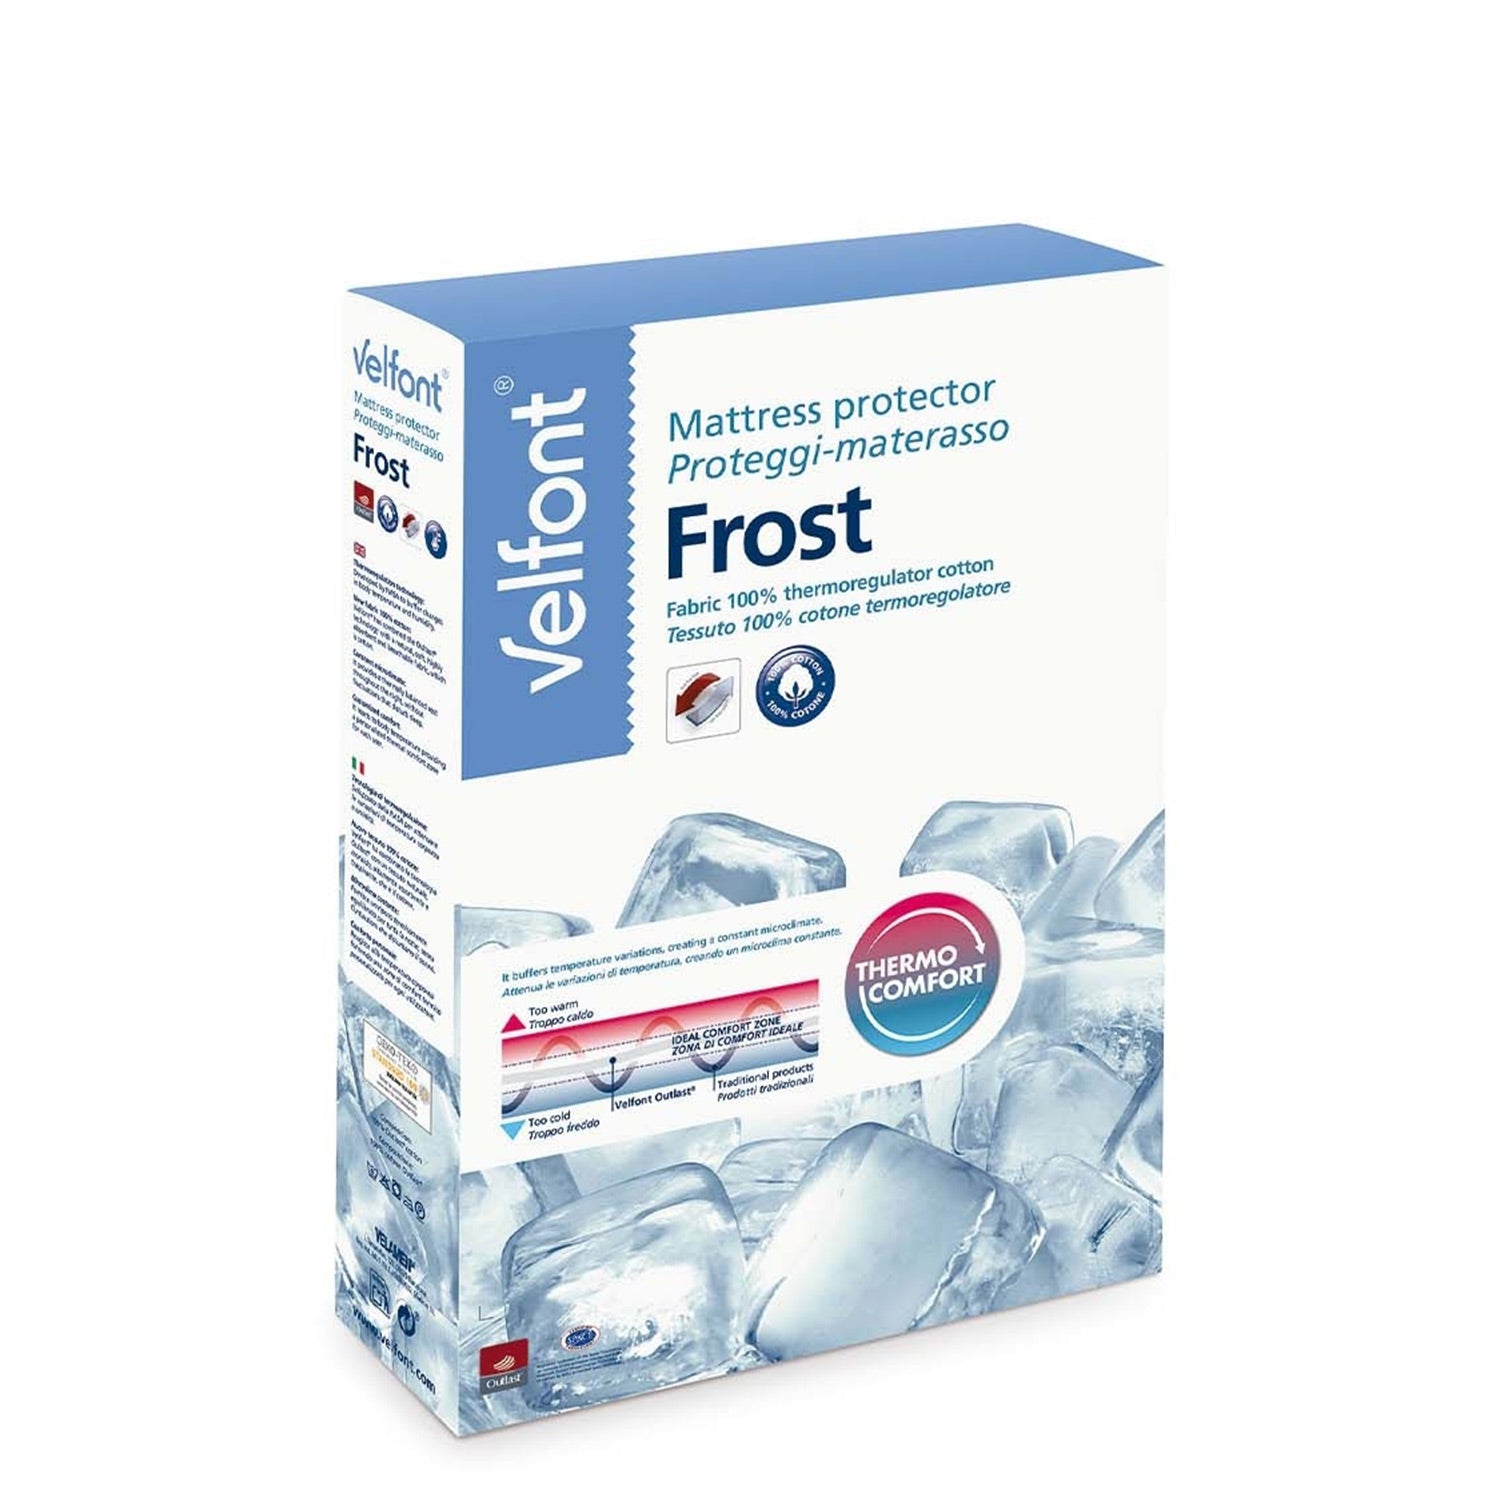 Frost mattress protector